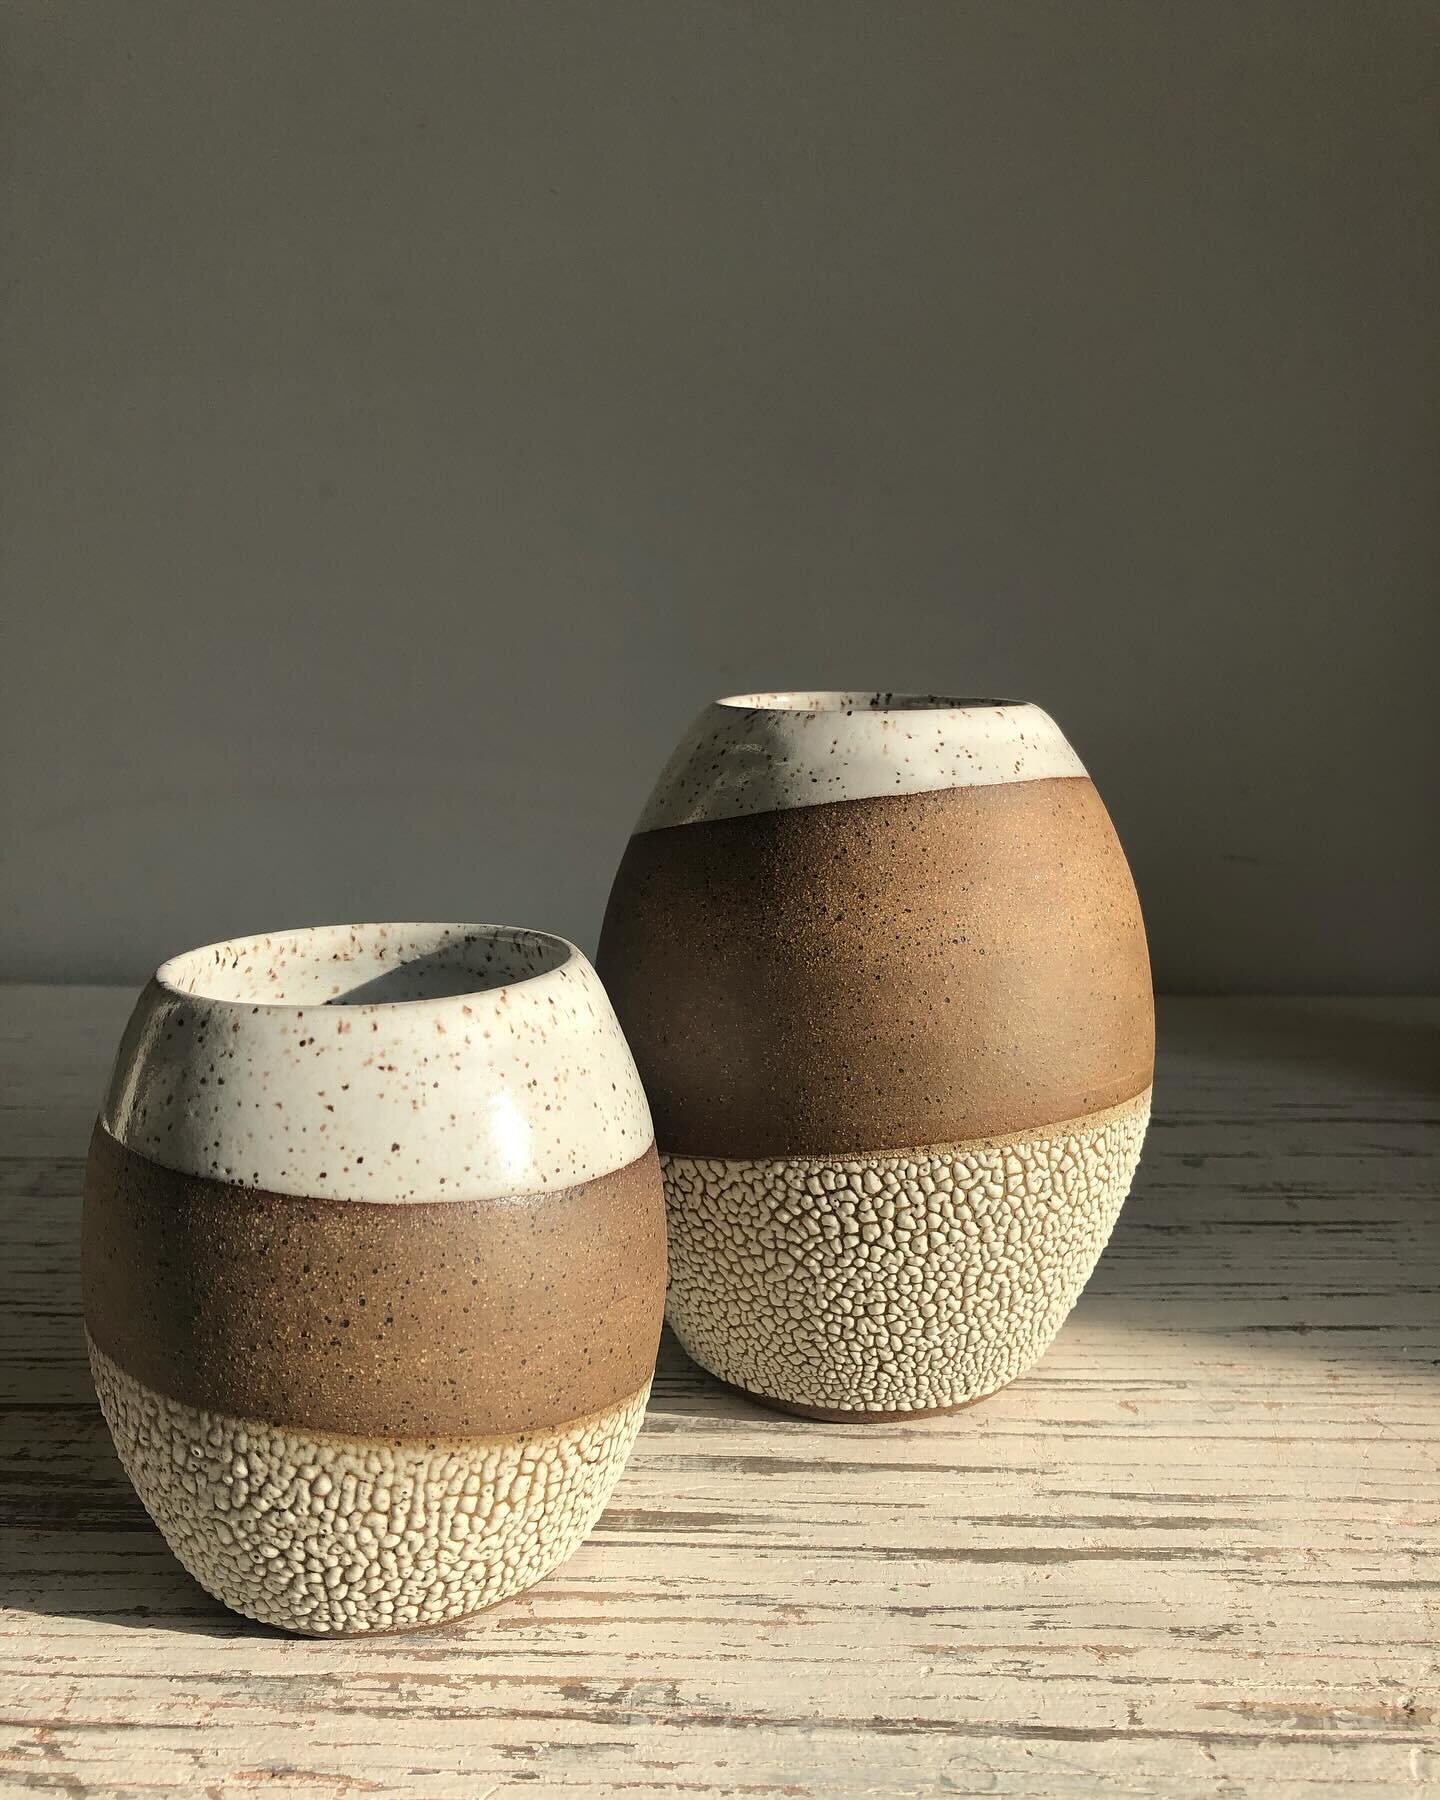 Bevel and Lichen vases are in the works and awaiting the kiln as they slowly dry. So excited to bring this collection back!🤎🤍

_
#eyreceramics #ceramics #pottery #ceramique #keramik #clay #poterie #ceramica #modernpottery #ceramicist #ceramicstudio